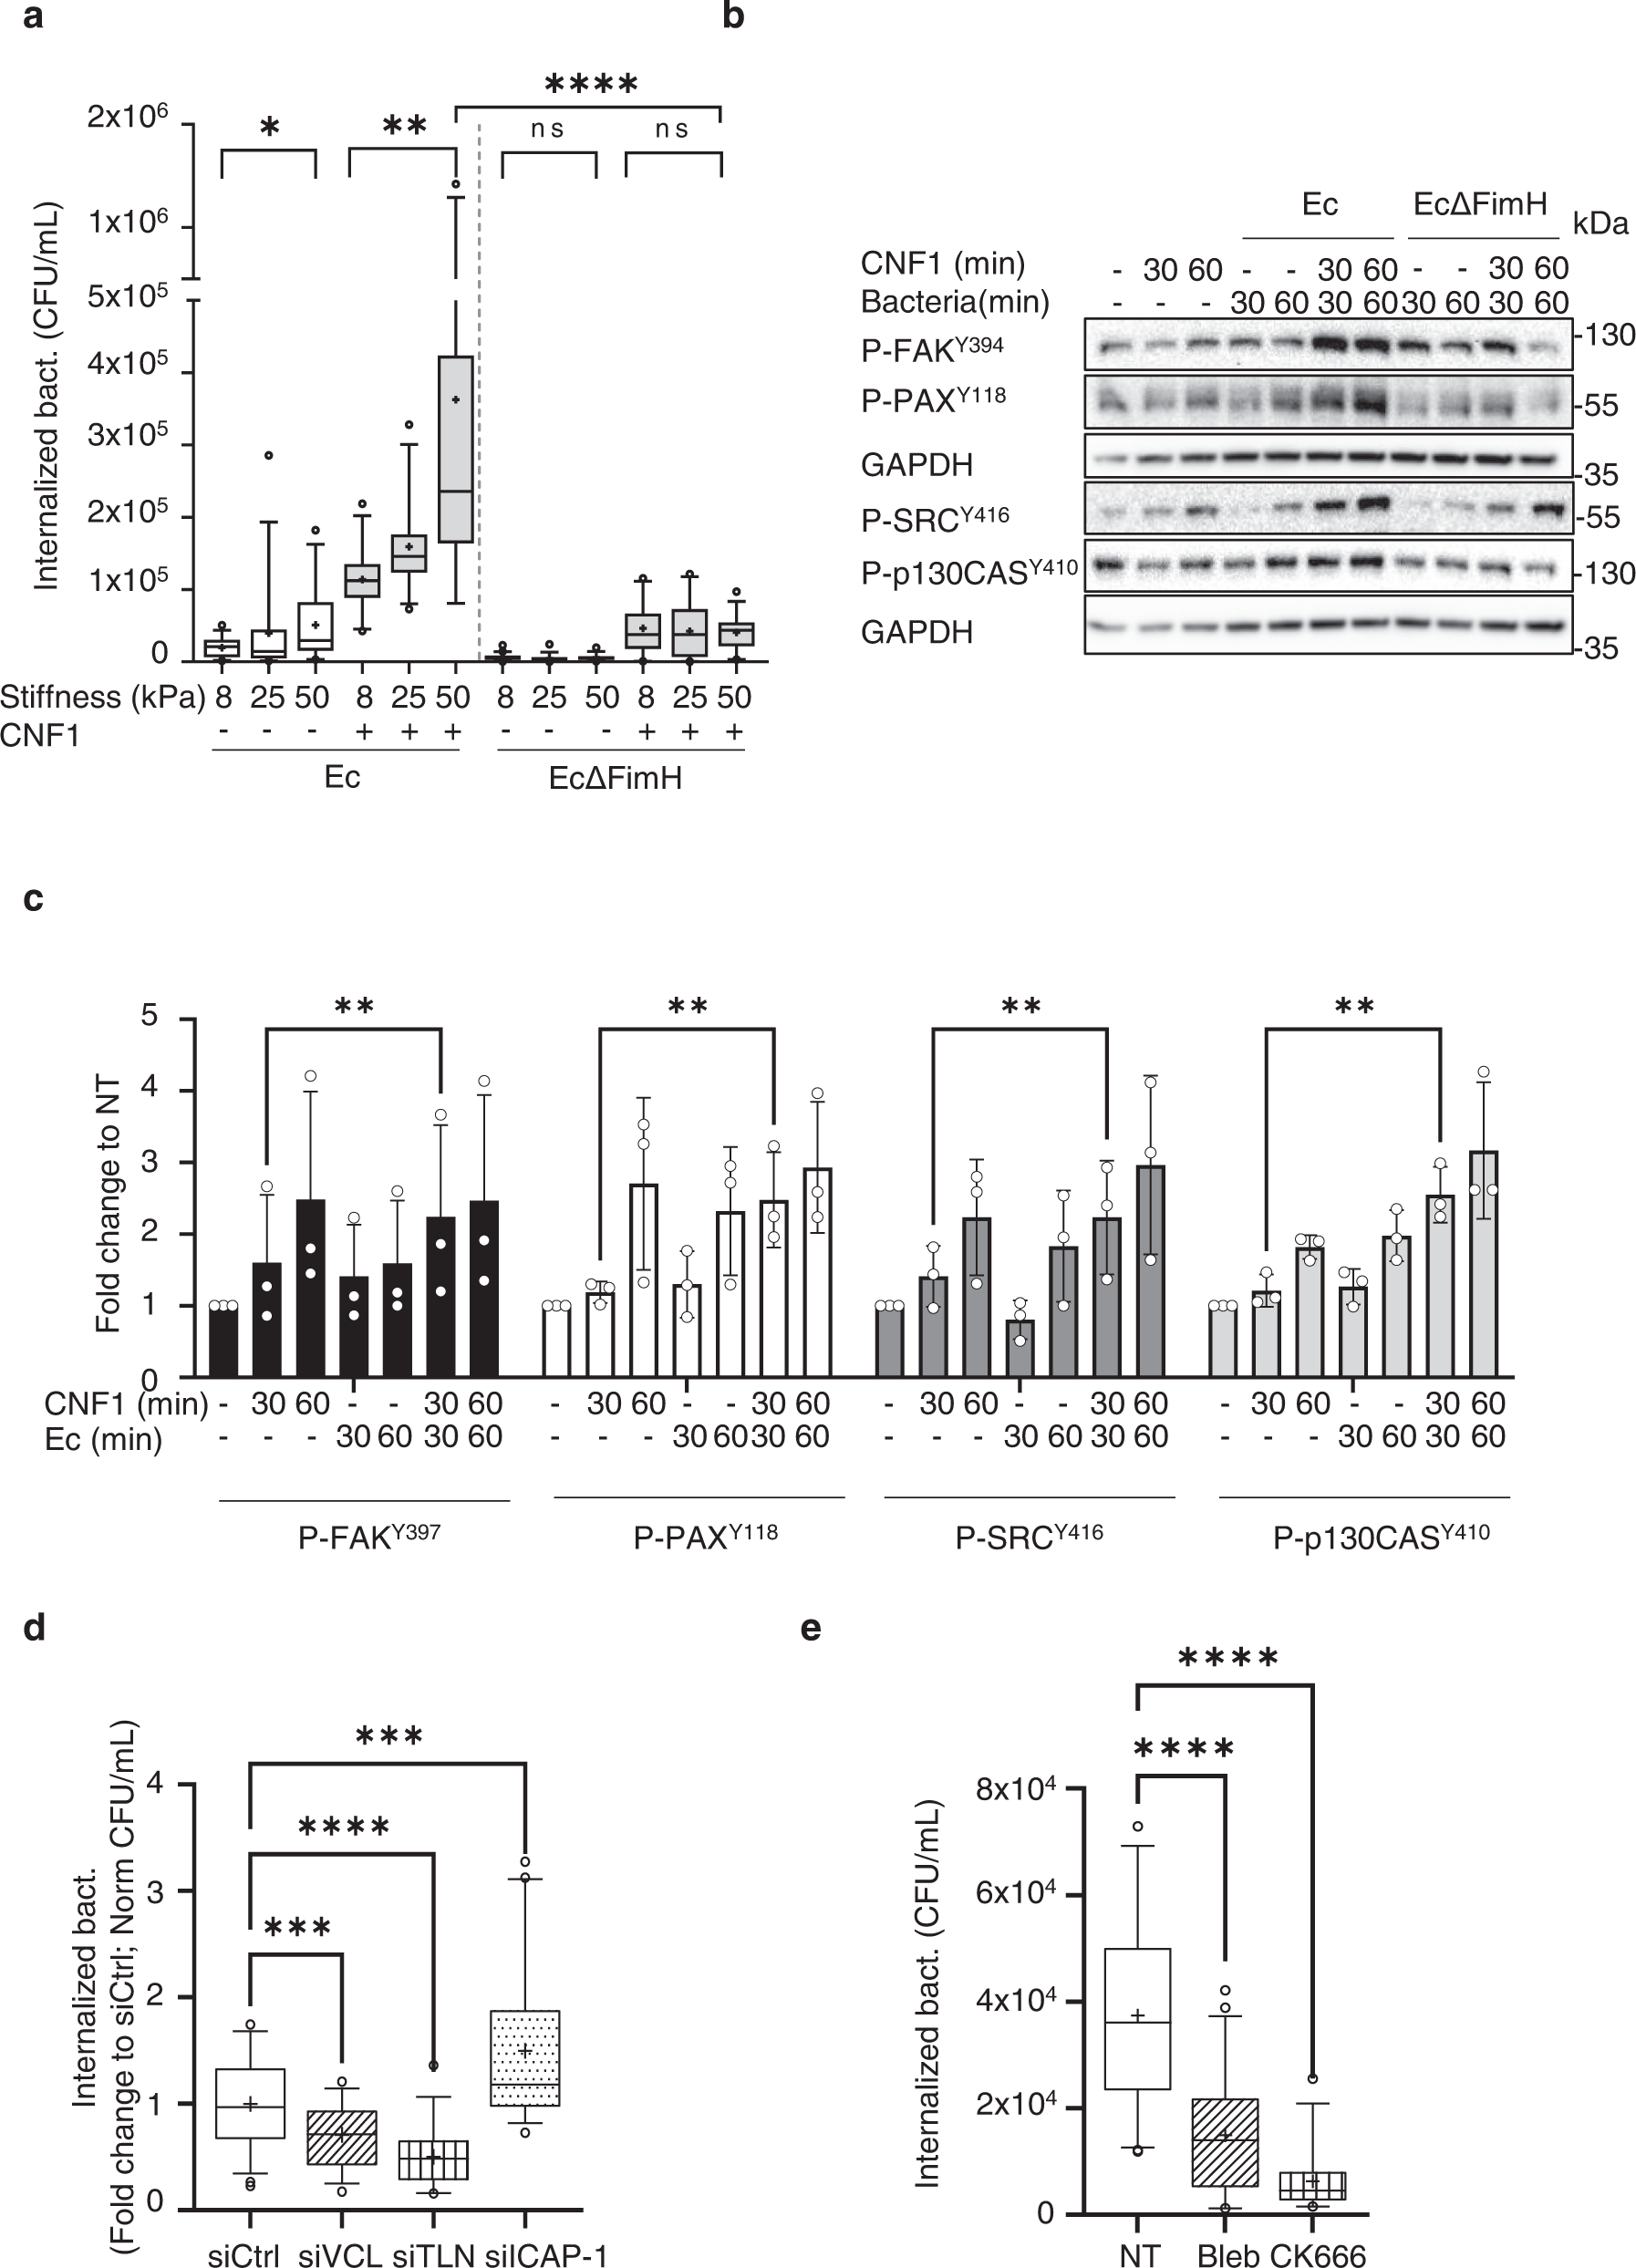 Optineurin links Hace1-dependent Rac ubiquitylation to integrin-mediated  mechanotransduction to control bacterial invasion and cell division |  Nature Communications